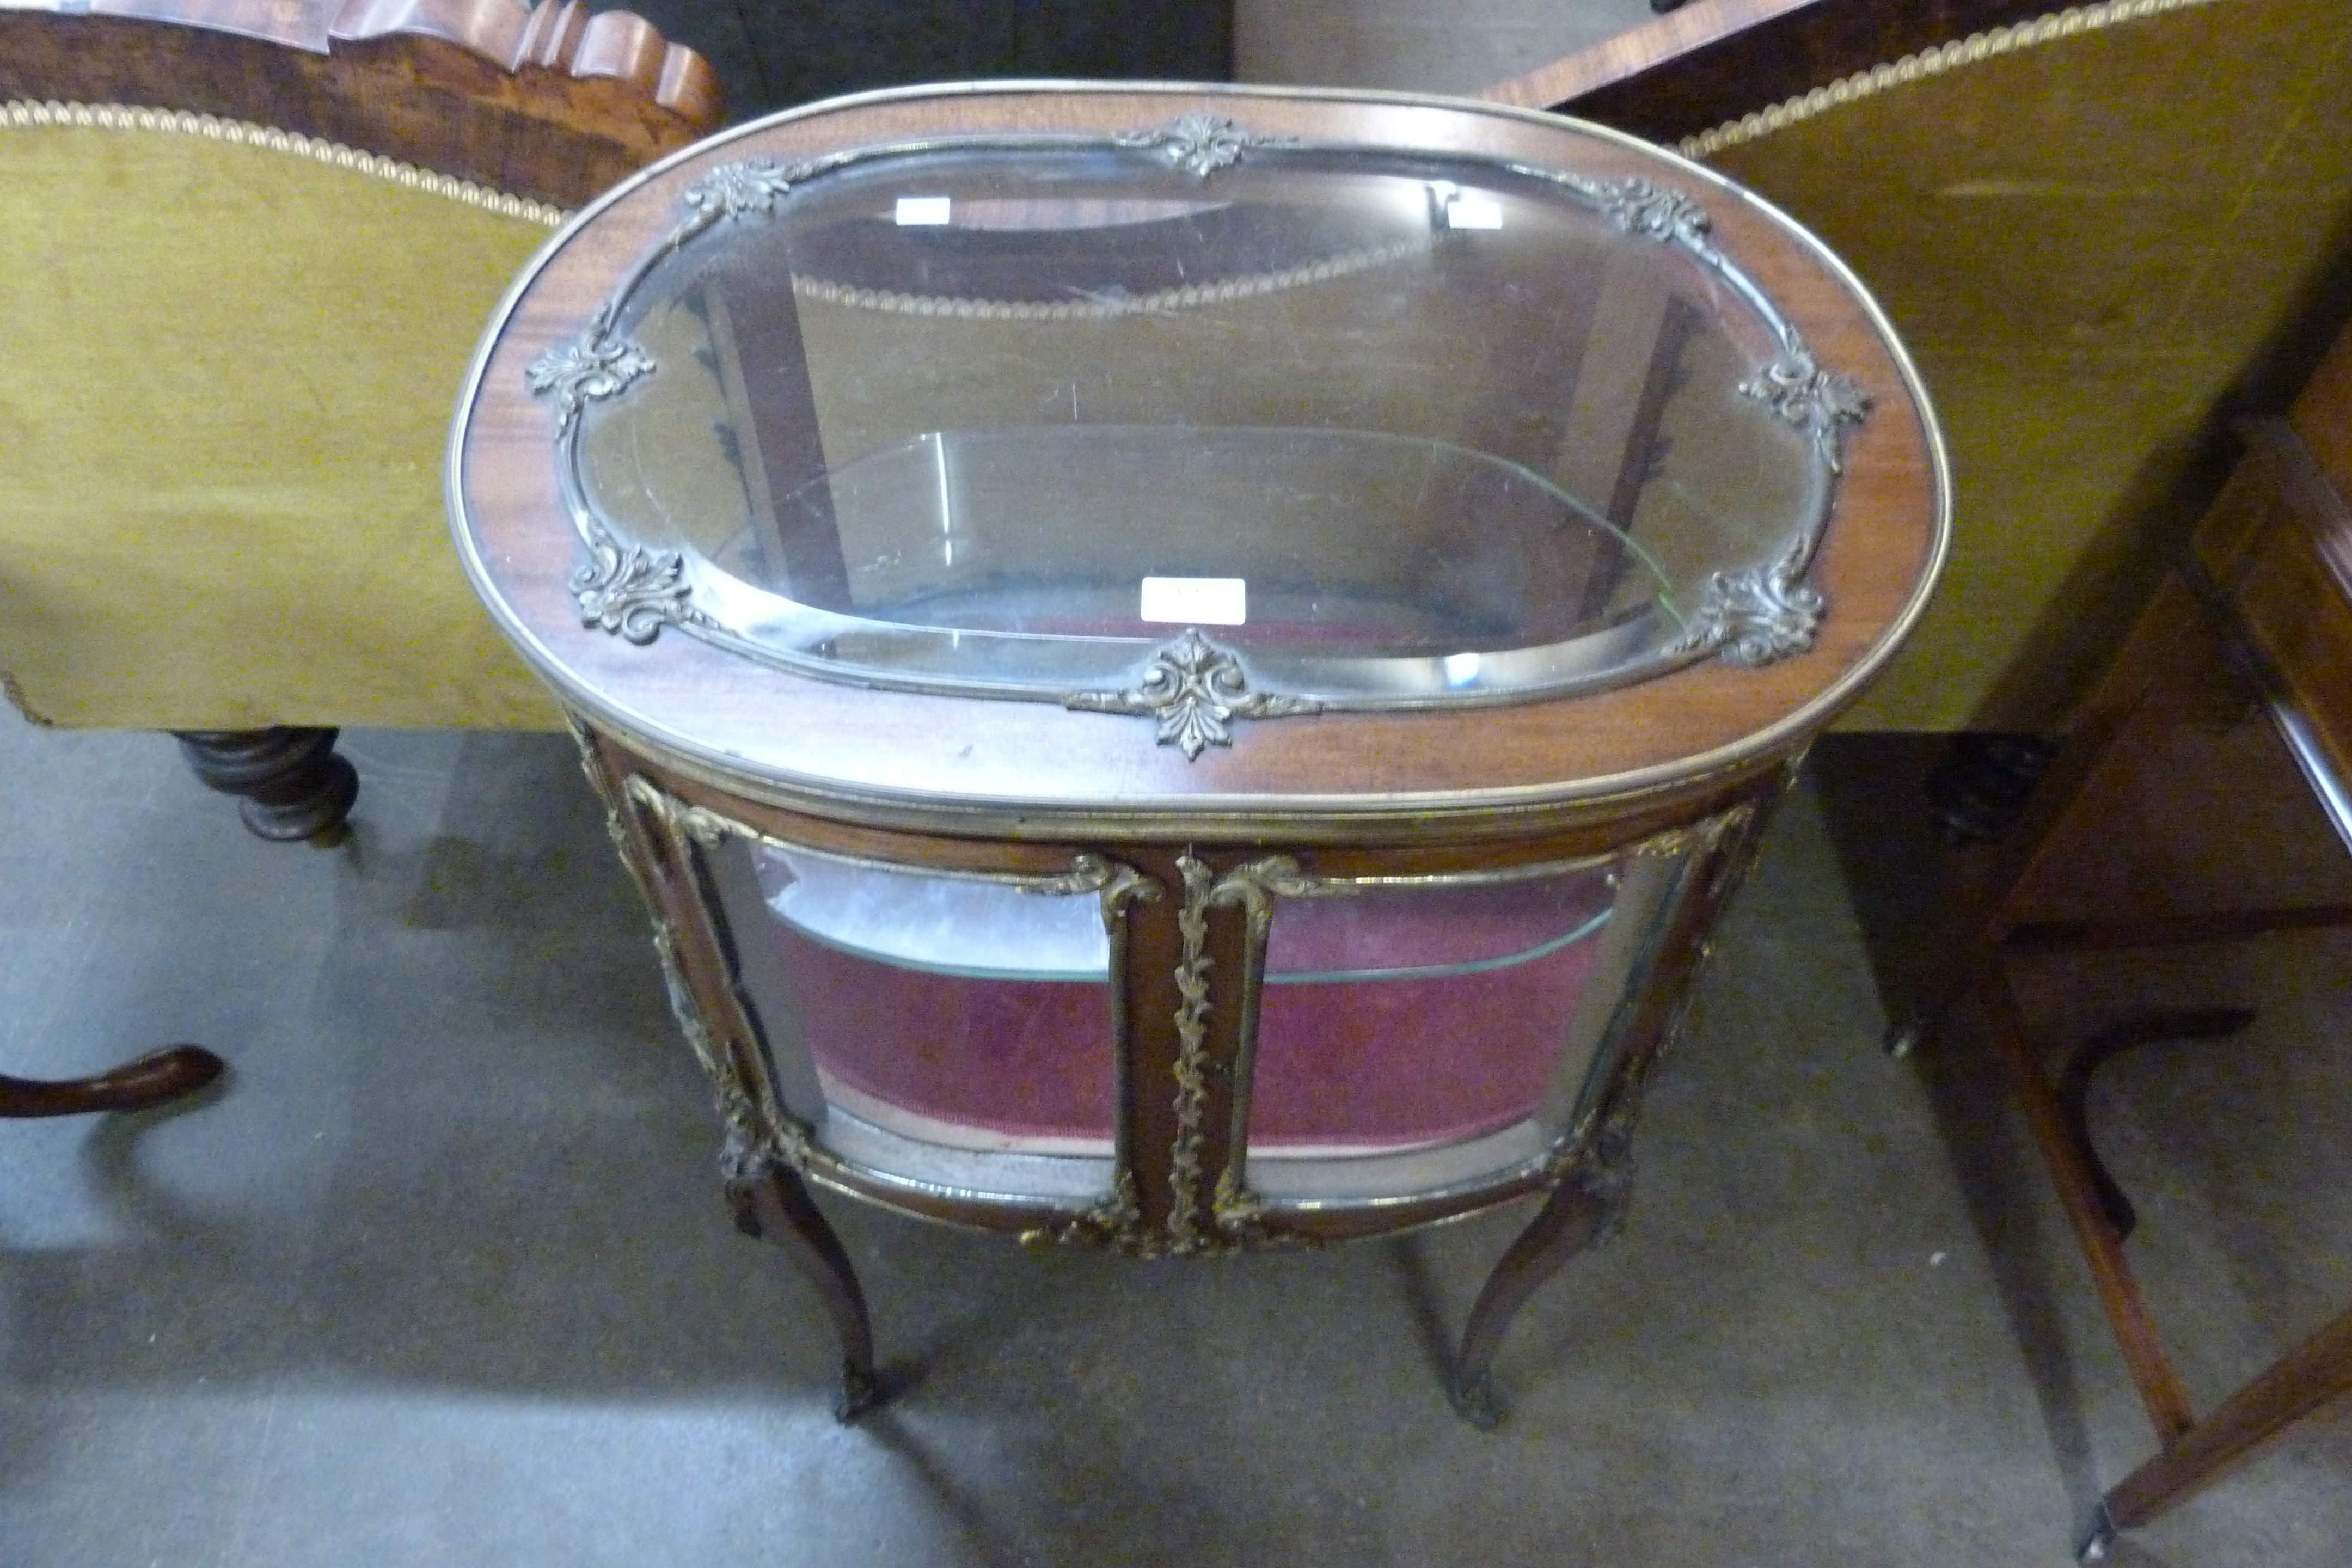 A 19th Century French mahogany and gilt metal mounted bijouterie cabinet - Image 2 of 2